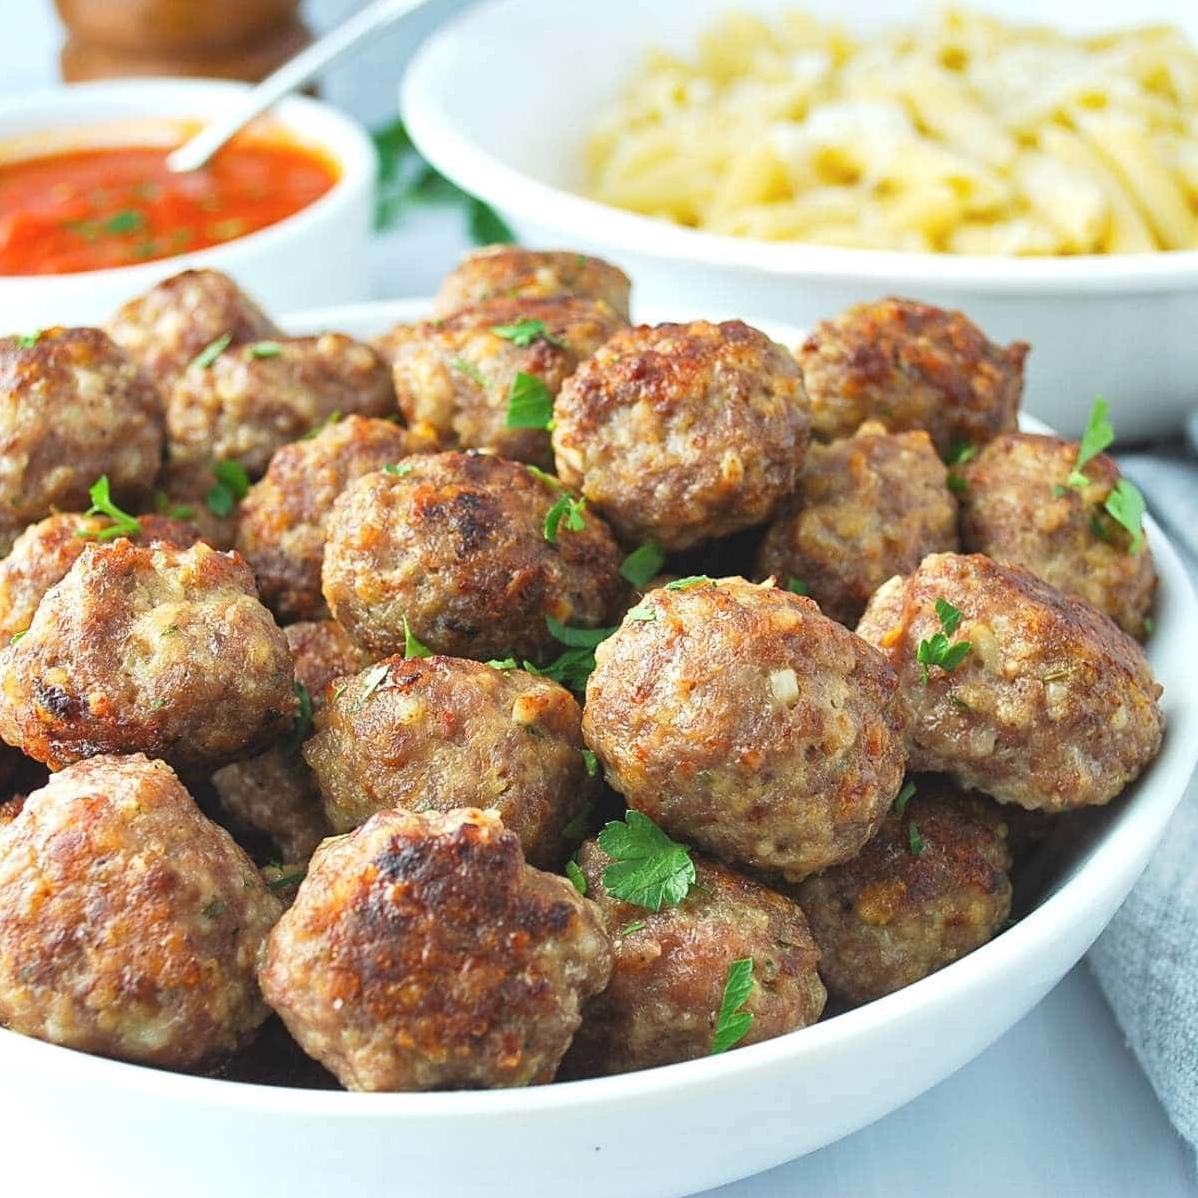  These gluten-free microwave meatballs are a game-changer!